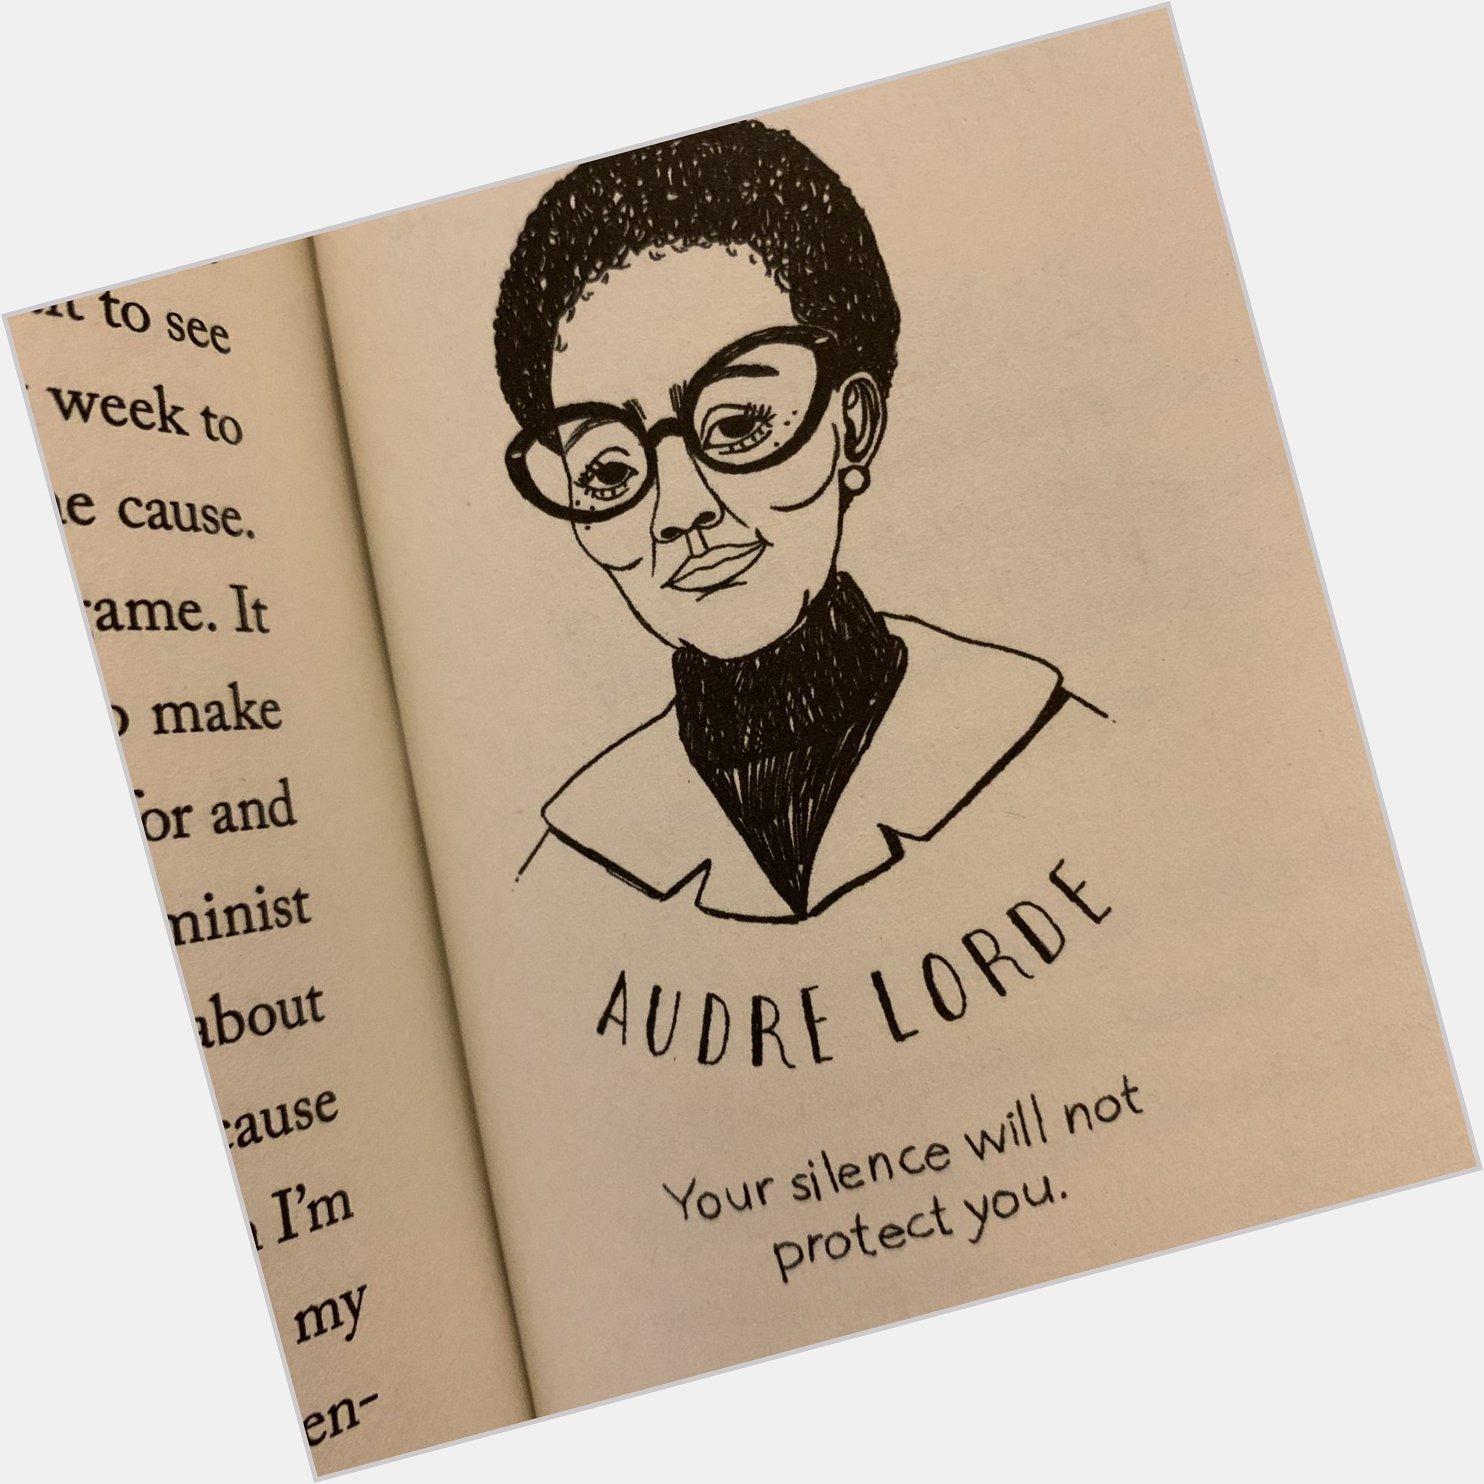 Happy Birthday, Audre Lorde! So thrilled we got to celebrate your genius in 